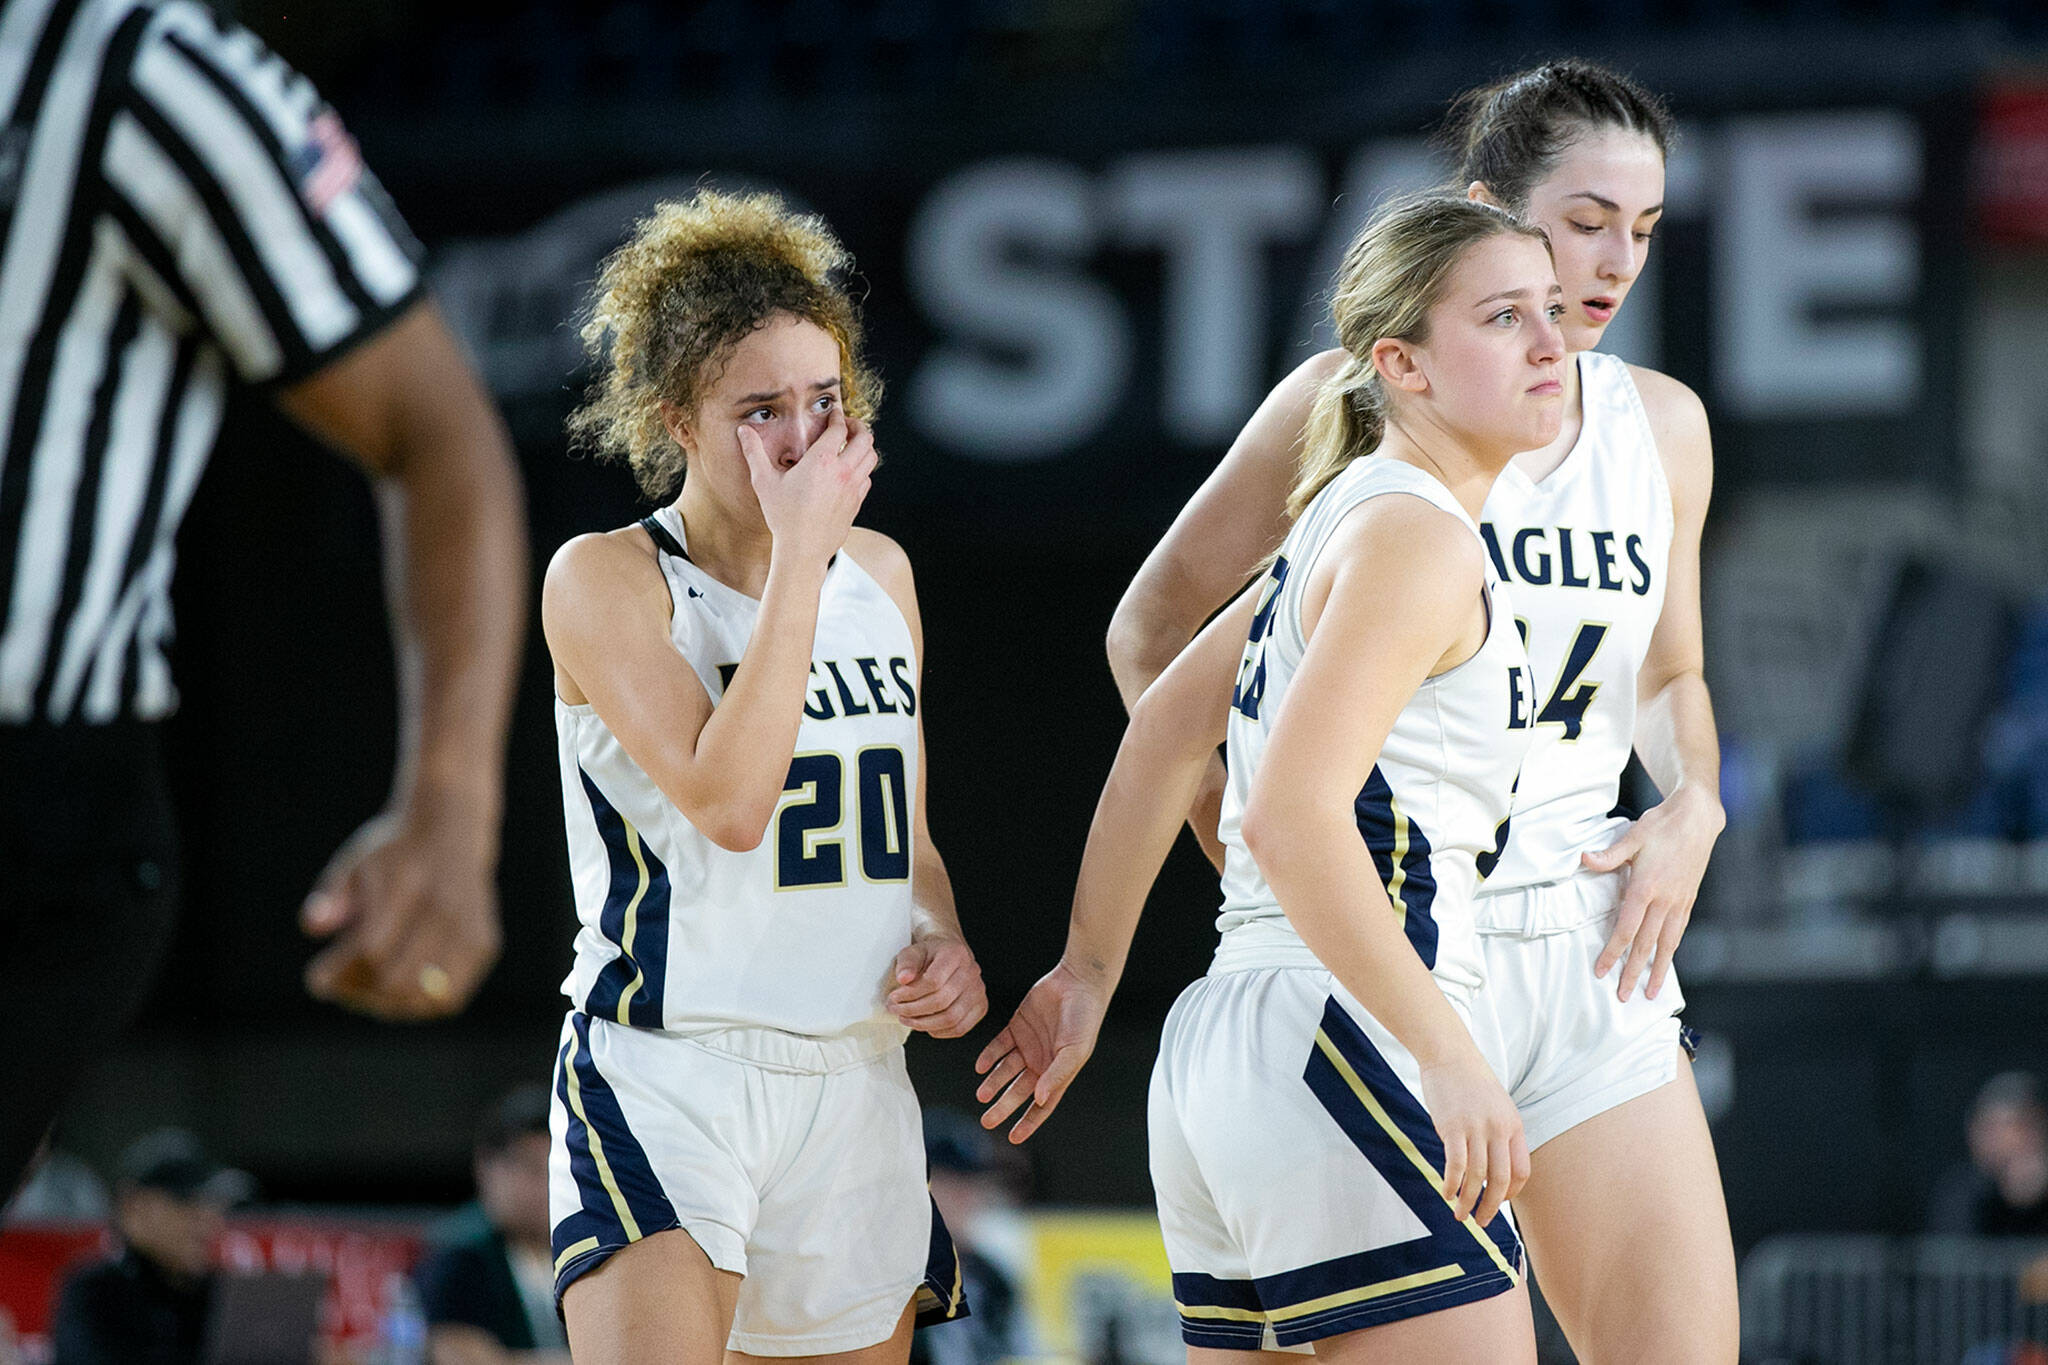 Arlington’s Samara Morrow, Jersey Walker and Jenna Villa walk off the court after losing to Lake Washington in the 3A semifinal on Friday, March 3, 2023, at the Tacoma Dome in Tacoma, Washington. (Ryan Berry / The Herald)